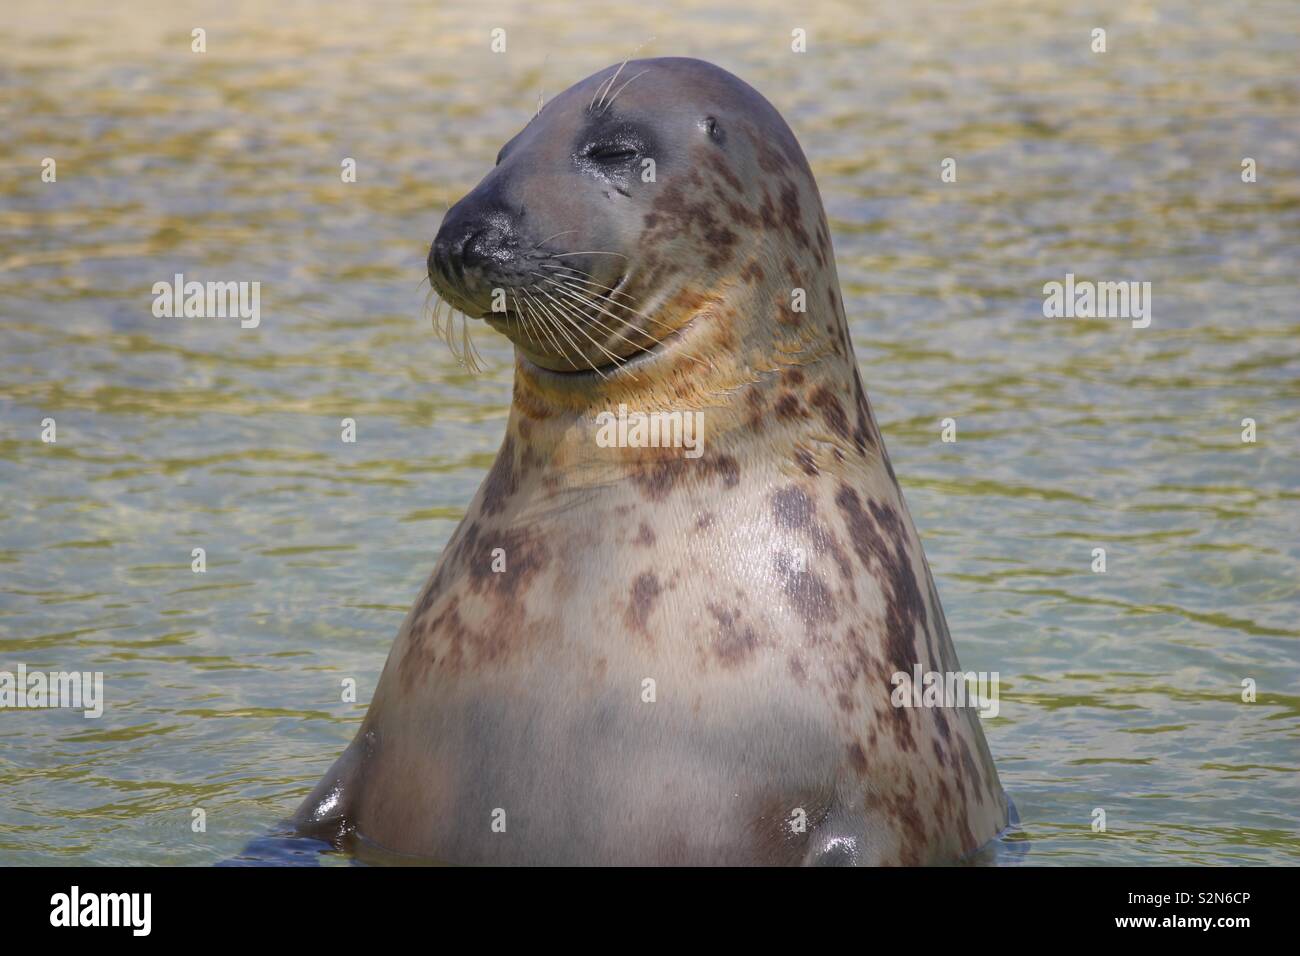 A gray seal waiting for feeding Stock Photo